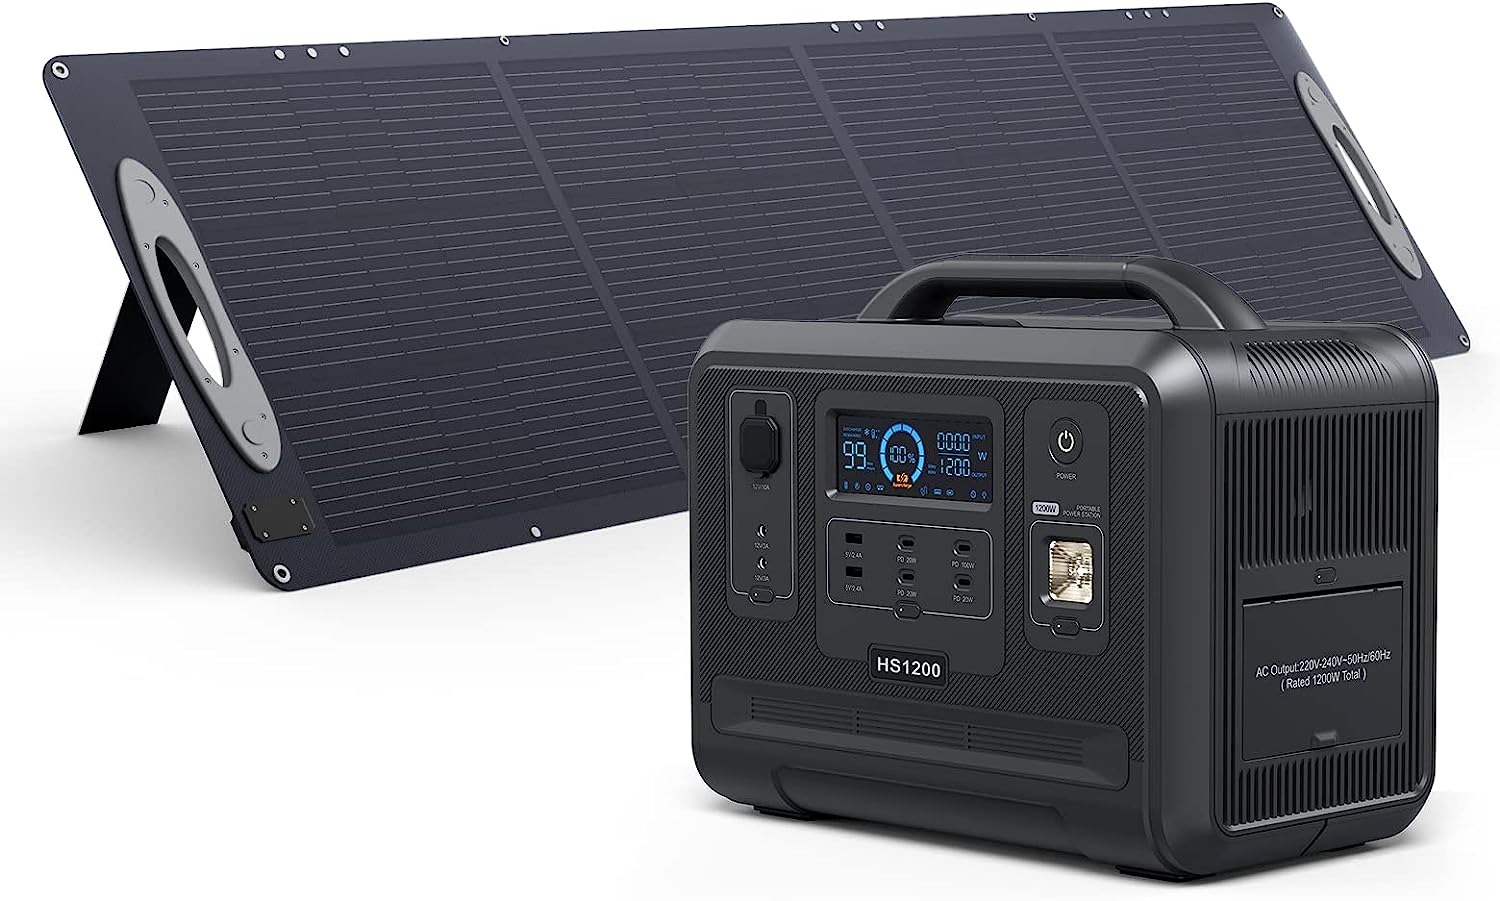  VDL Portable Power Station 1200W/960Wh Solar Generator, HS1200  LiFePO4 Battery Generator 3500 Cycles Fully Charged 1.5 Hours, 4x110V Pure  Sine Wave AC Outlet for UPS, Outdoor, Camping, RV, Emergency : Patio